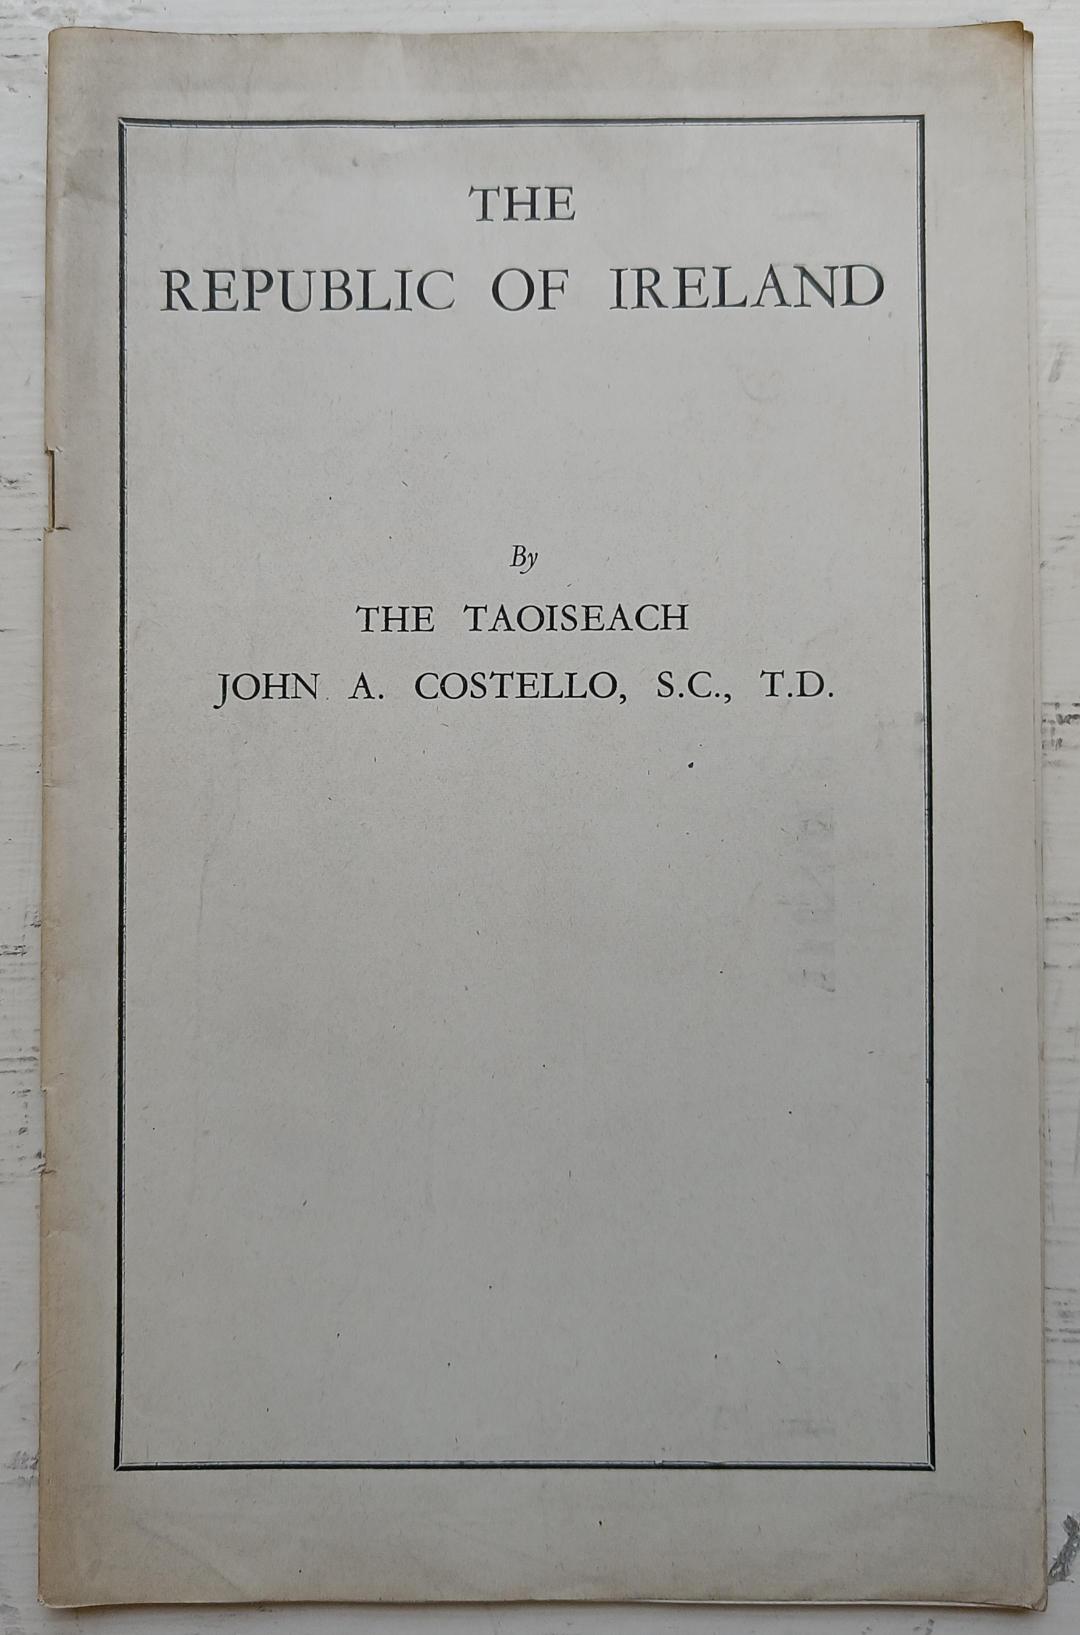 PAMPHLET BUNDLE: Texts on Ireland by John A. Costello